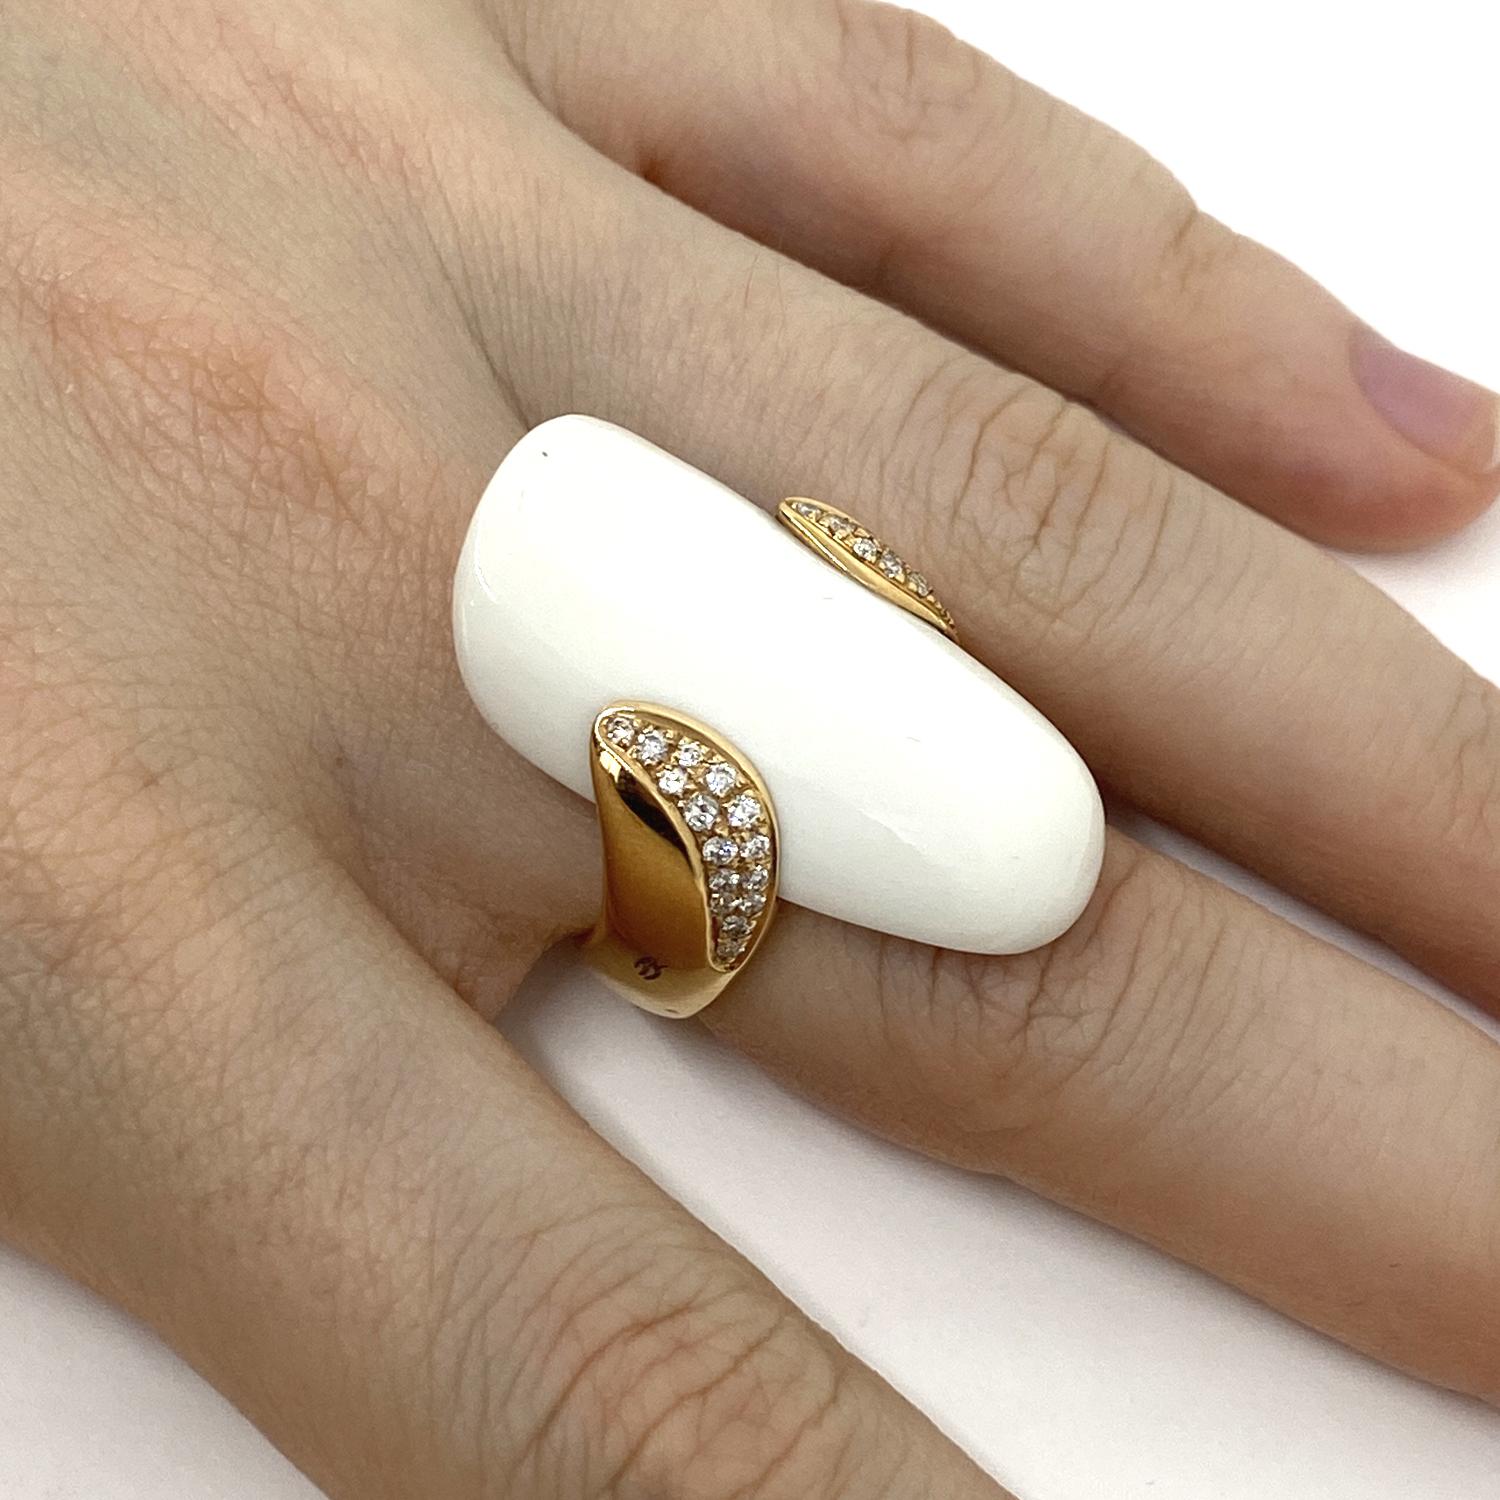 Signed Gavello ring made of 18 kt rose gold and white kogolong stone and natural brilliant-cut white diamonds for ct.0.35
-------------------------------------------------

Important Note : In order to speed up the publishing process of our vast